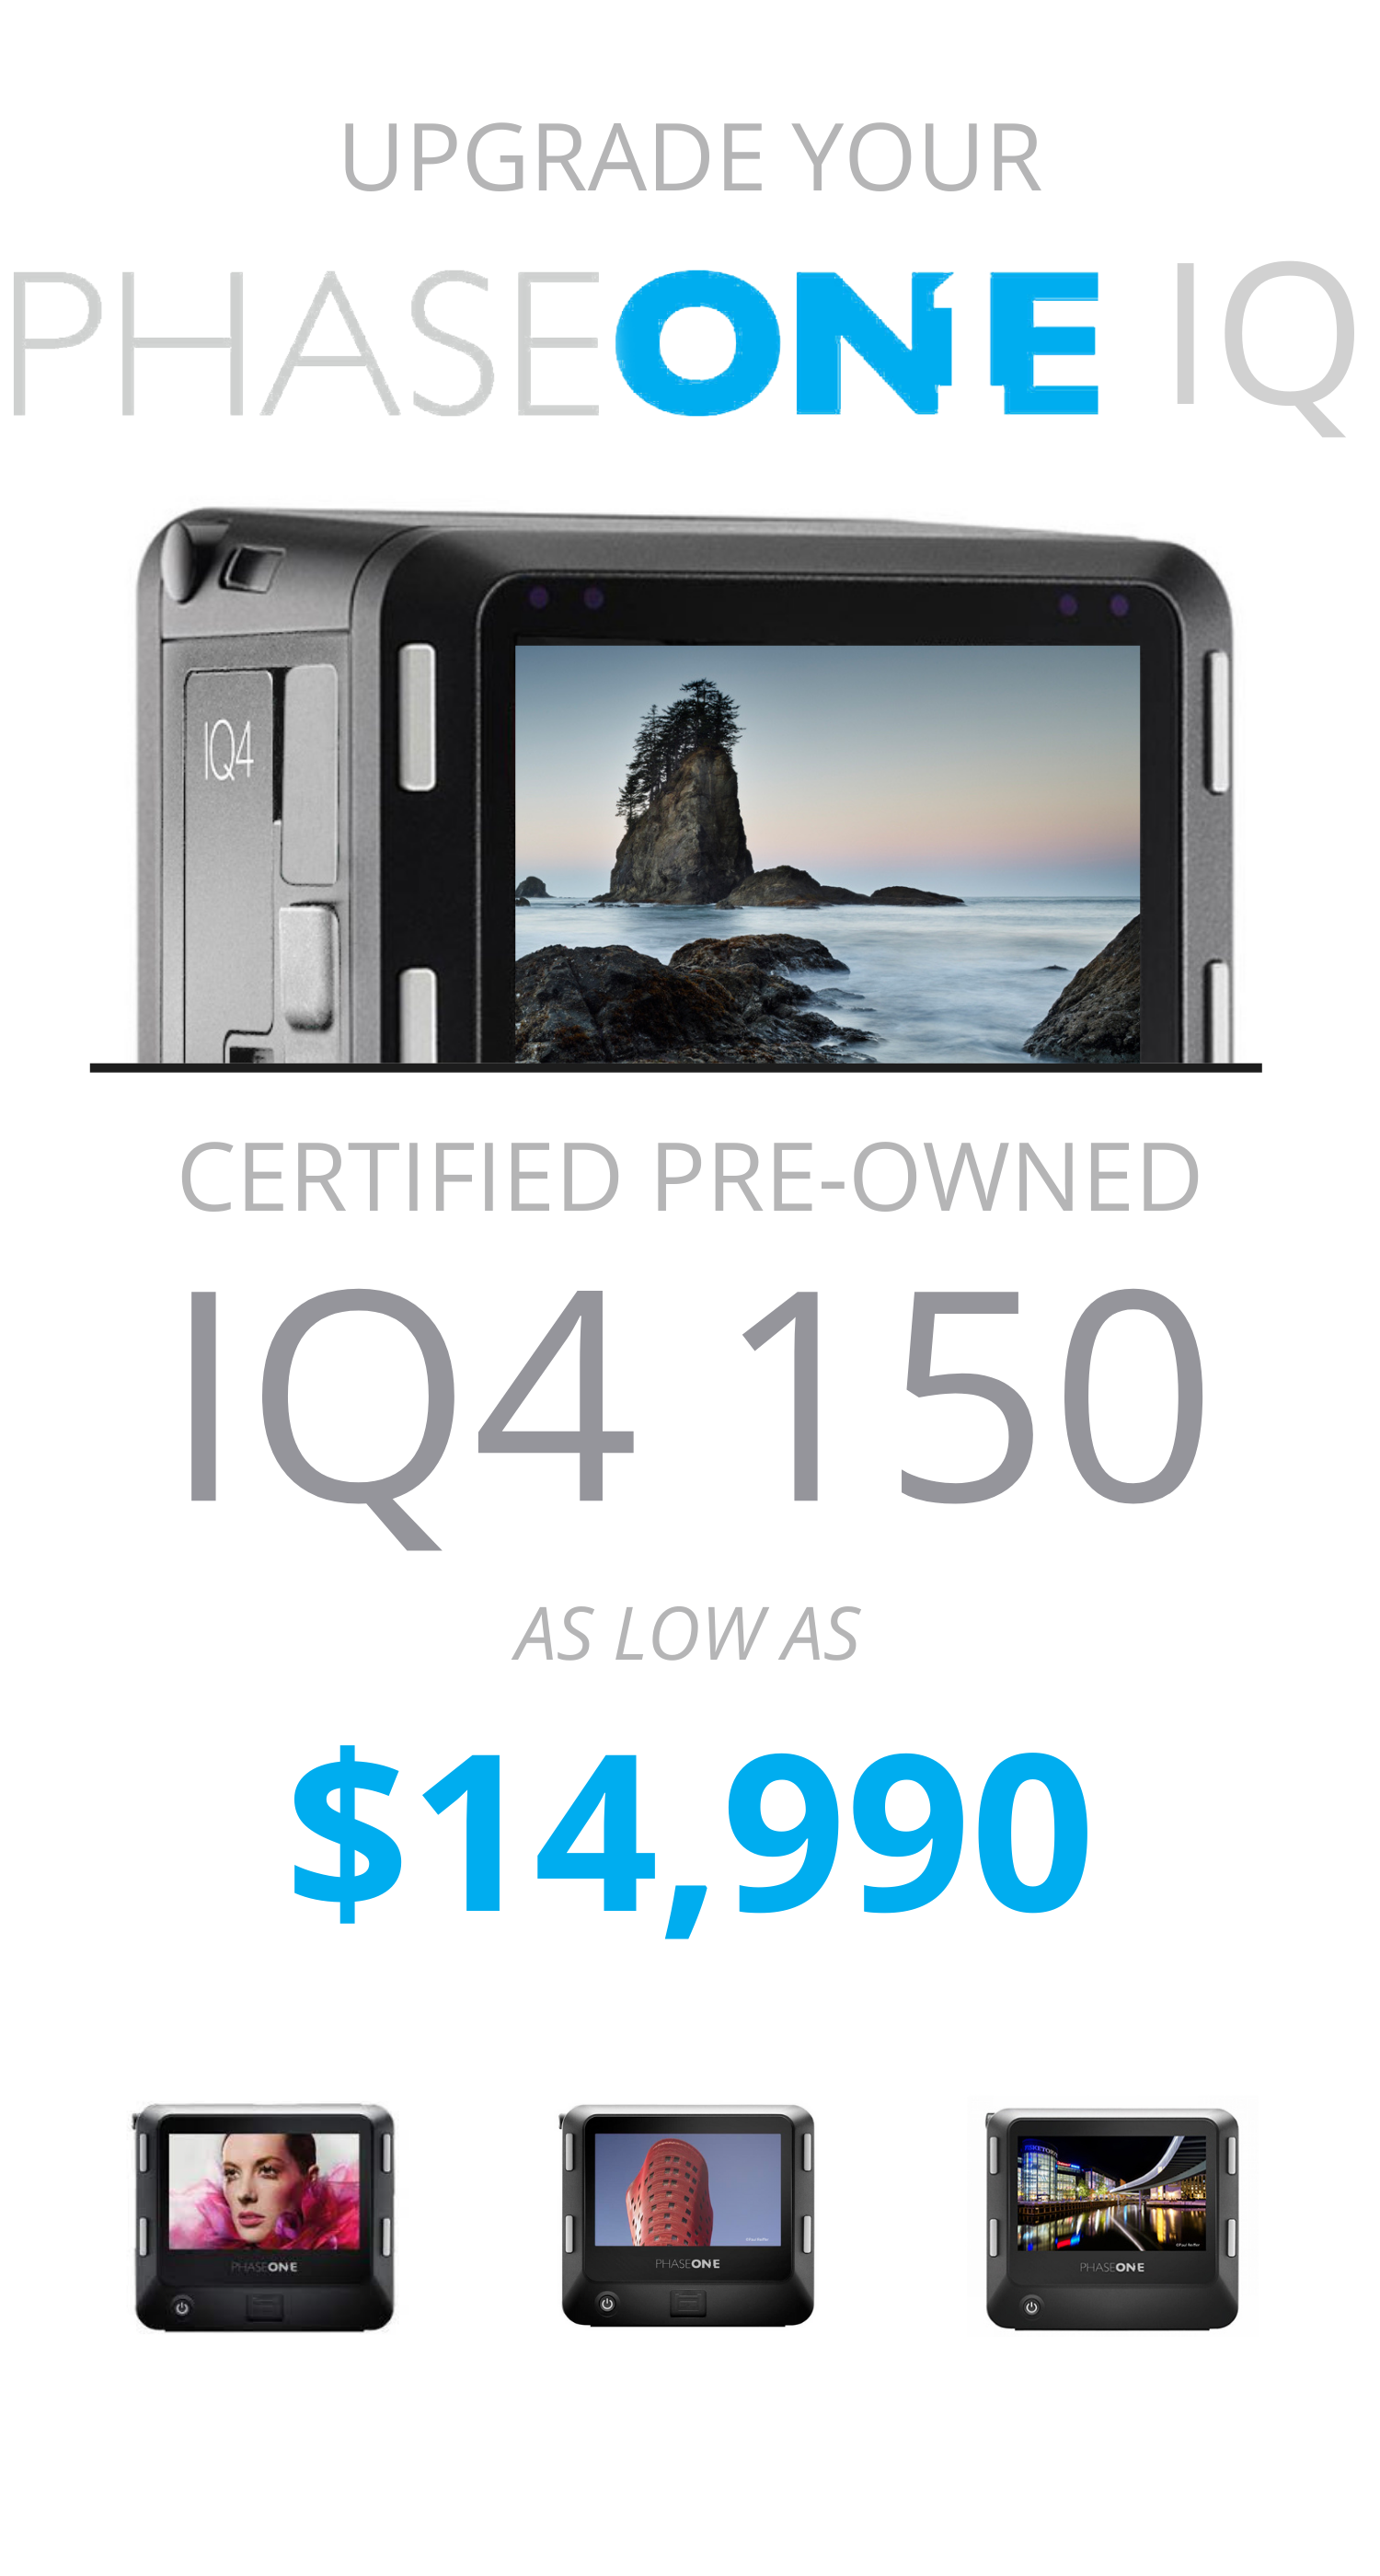 Upgrad your Phase one iq to certified pre-owned / used Iq4 150 digital back as low as 14990 special deals 